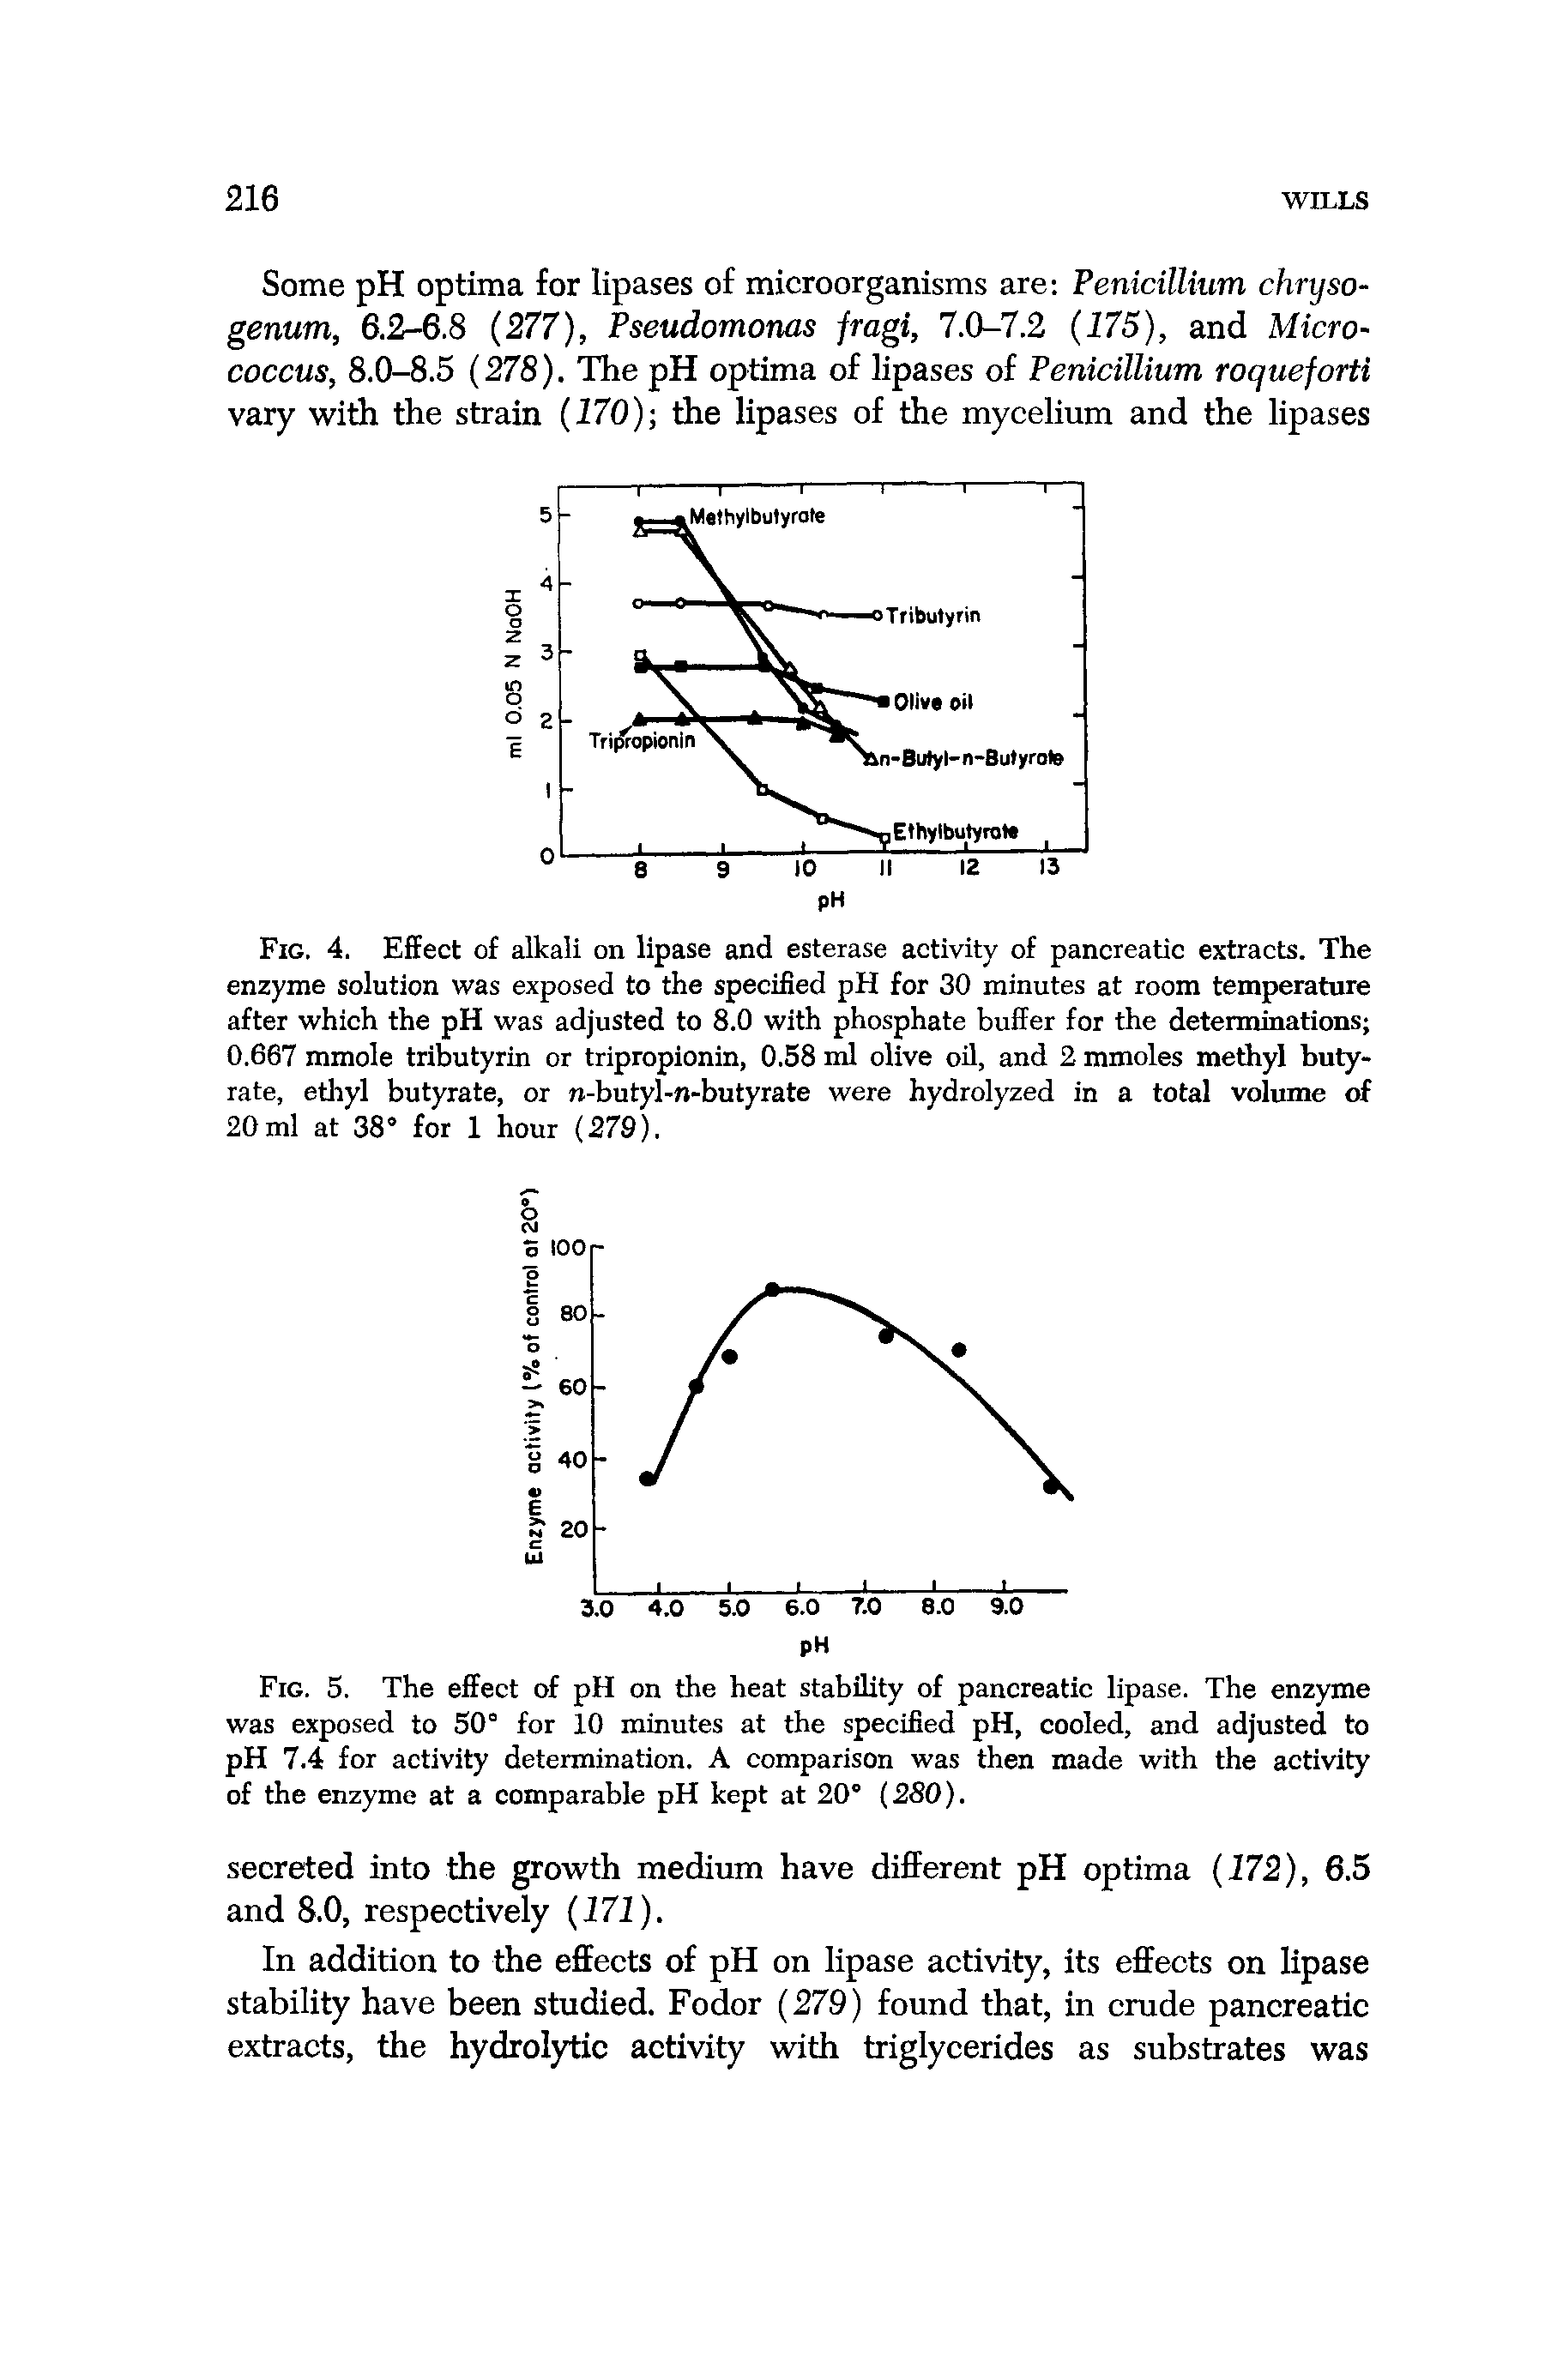 Fig. 4. Effect of alkali on lipase and esterase activity of pancreatic extracts. The enzyme solution was exposed to the specified pH for 30 minutes at room temperature after which the pH was adjusted to 8.0 with phosphate bufEer for the determinatioiis 0.667 mmole tributyrin or tripropionin, 0.58 olive oil, and 2 mmoles methyl butyrate, ethyl butyrate, or -butyl-n-butyrate were hydrolyzed in a total volume of 20 ml at 38° for 1 hour (279).